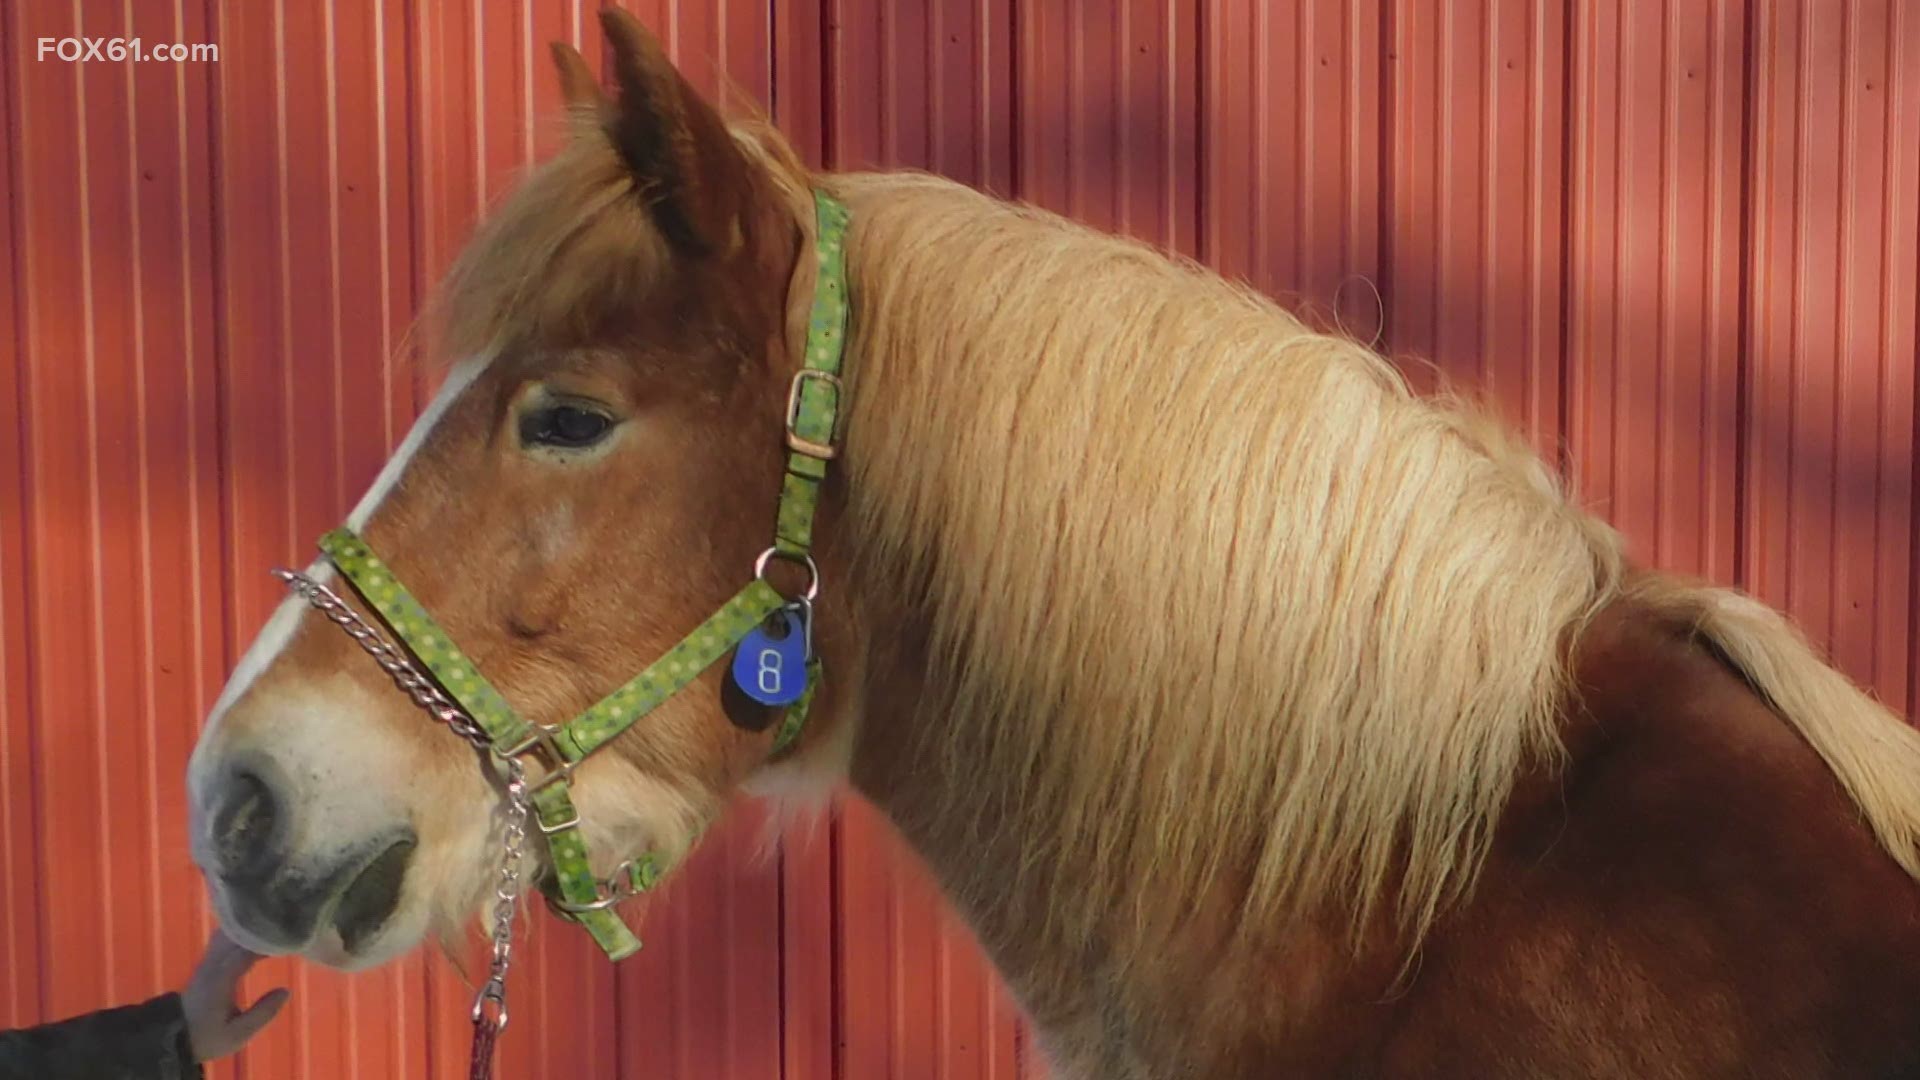 The Department of Agriculture Rescued nine horses, and relocated them to a second chance rescue barn in Niantic.